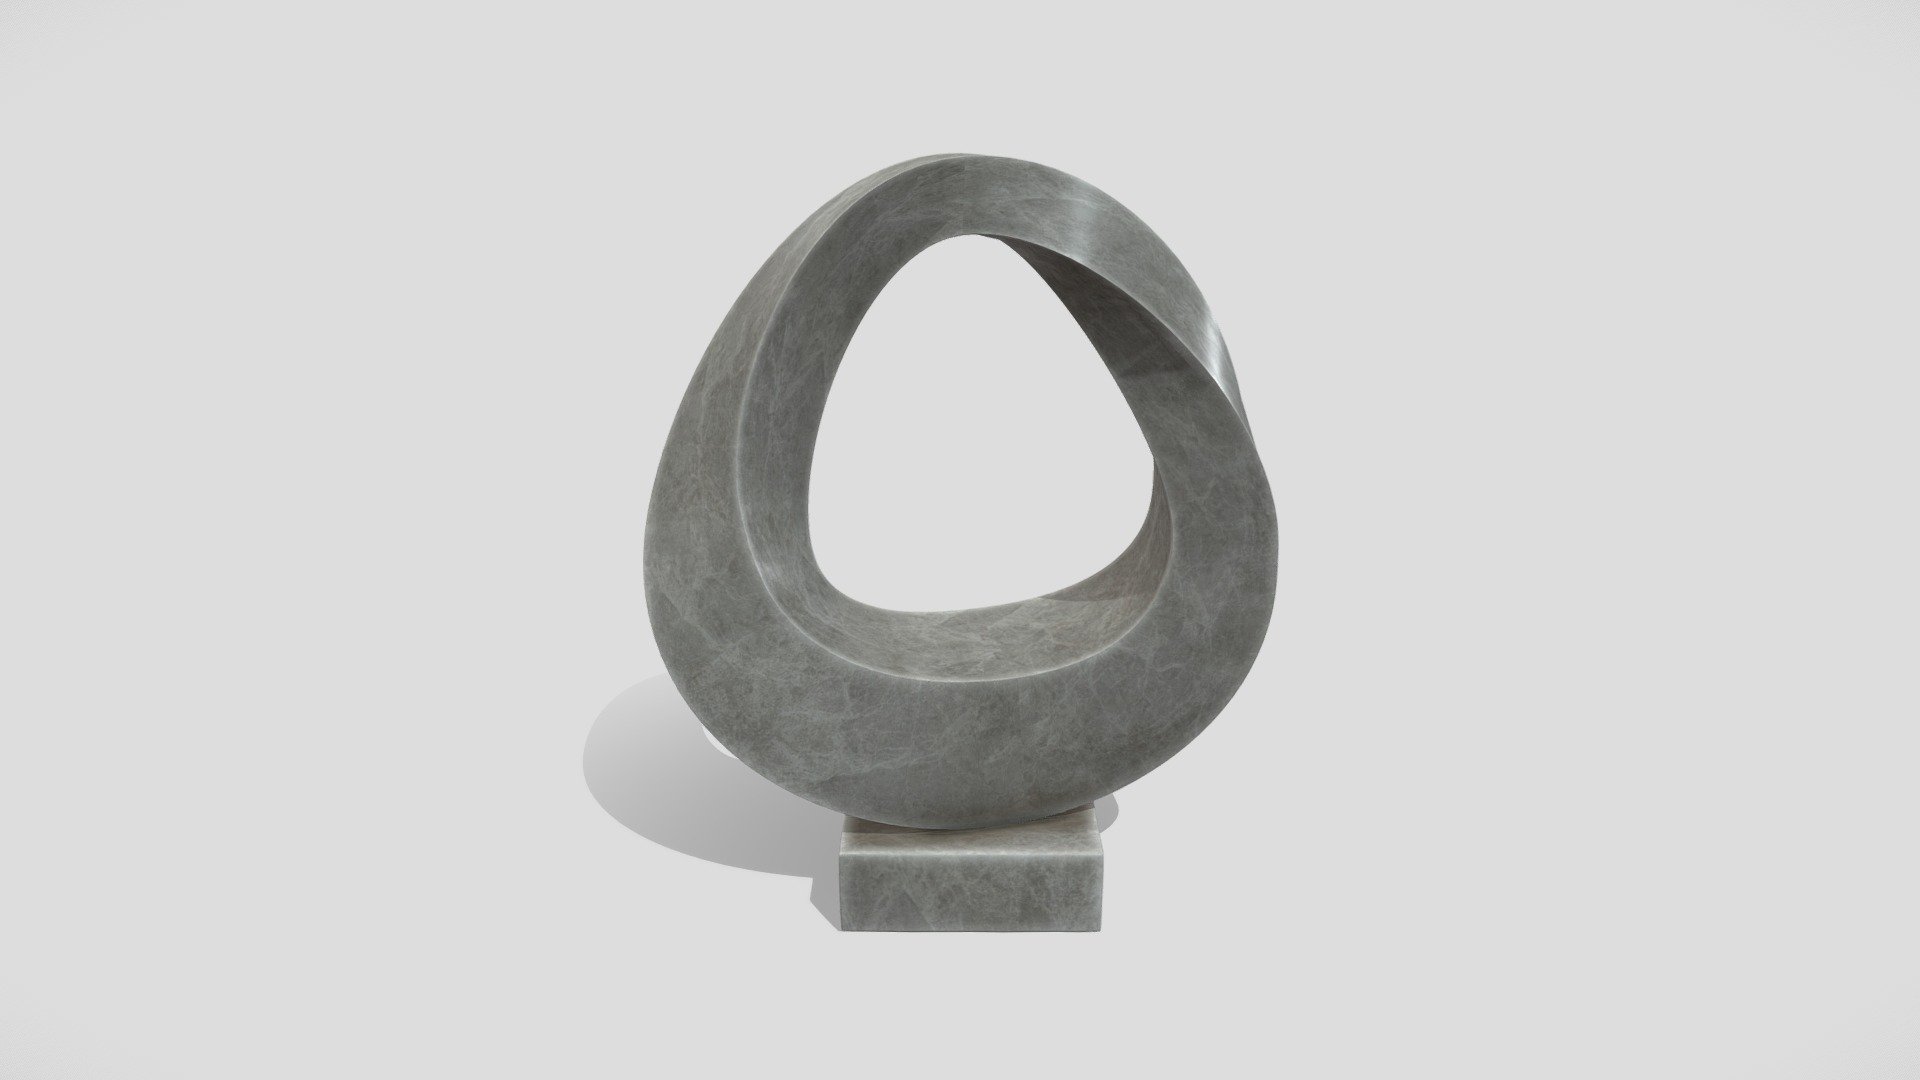 Modern Decorative Abstract Stone Art Sculpture 06

Modern abstract shapes in tandem with classy natural materials will make any space vivid.

Dimensions: 60 x 142 x H 170 cm

Material: Stone

3D models: .3DS, .FBX, .OBJ as well 3d model